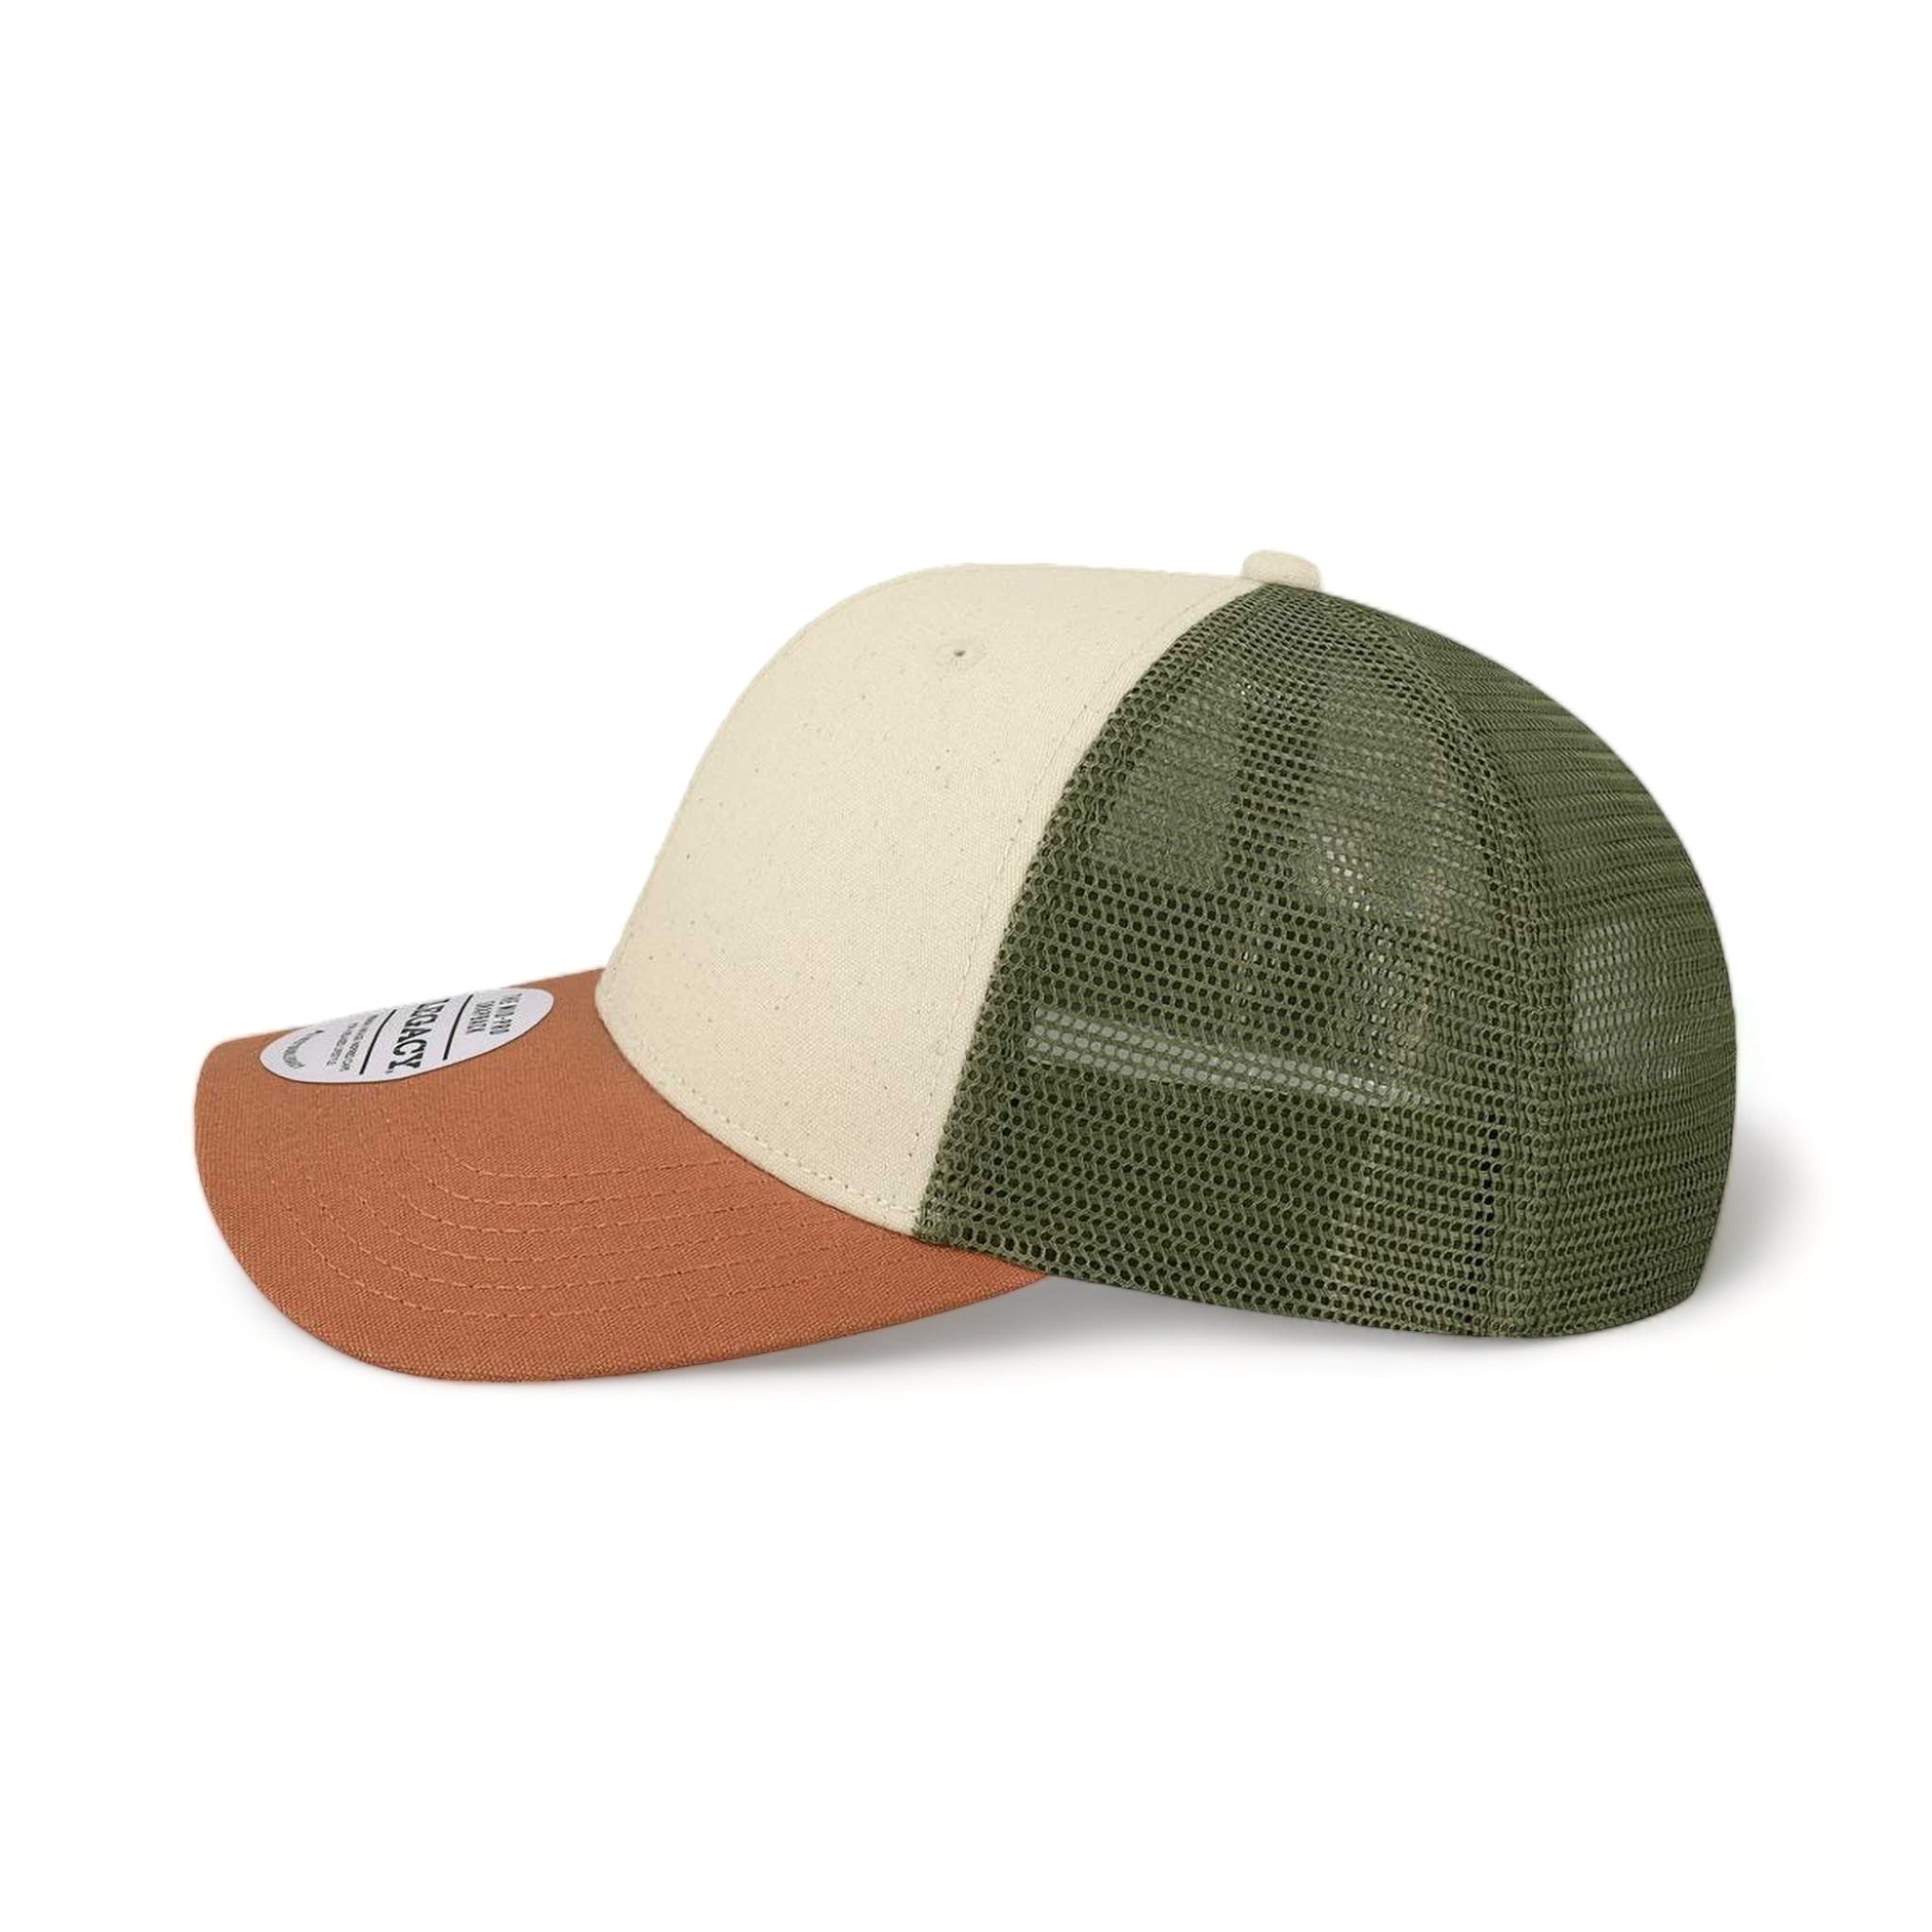 Side view of LEGACY MPS custom hat in stone, bronze and light olive green